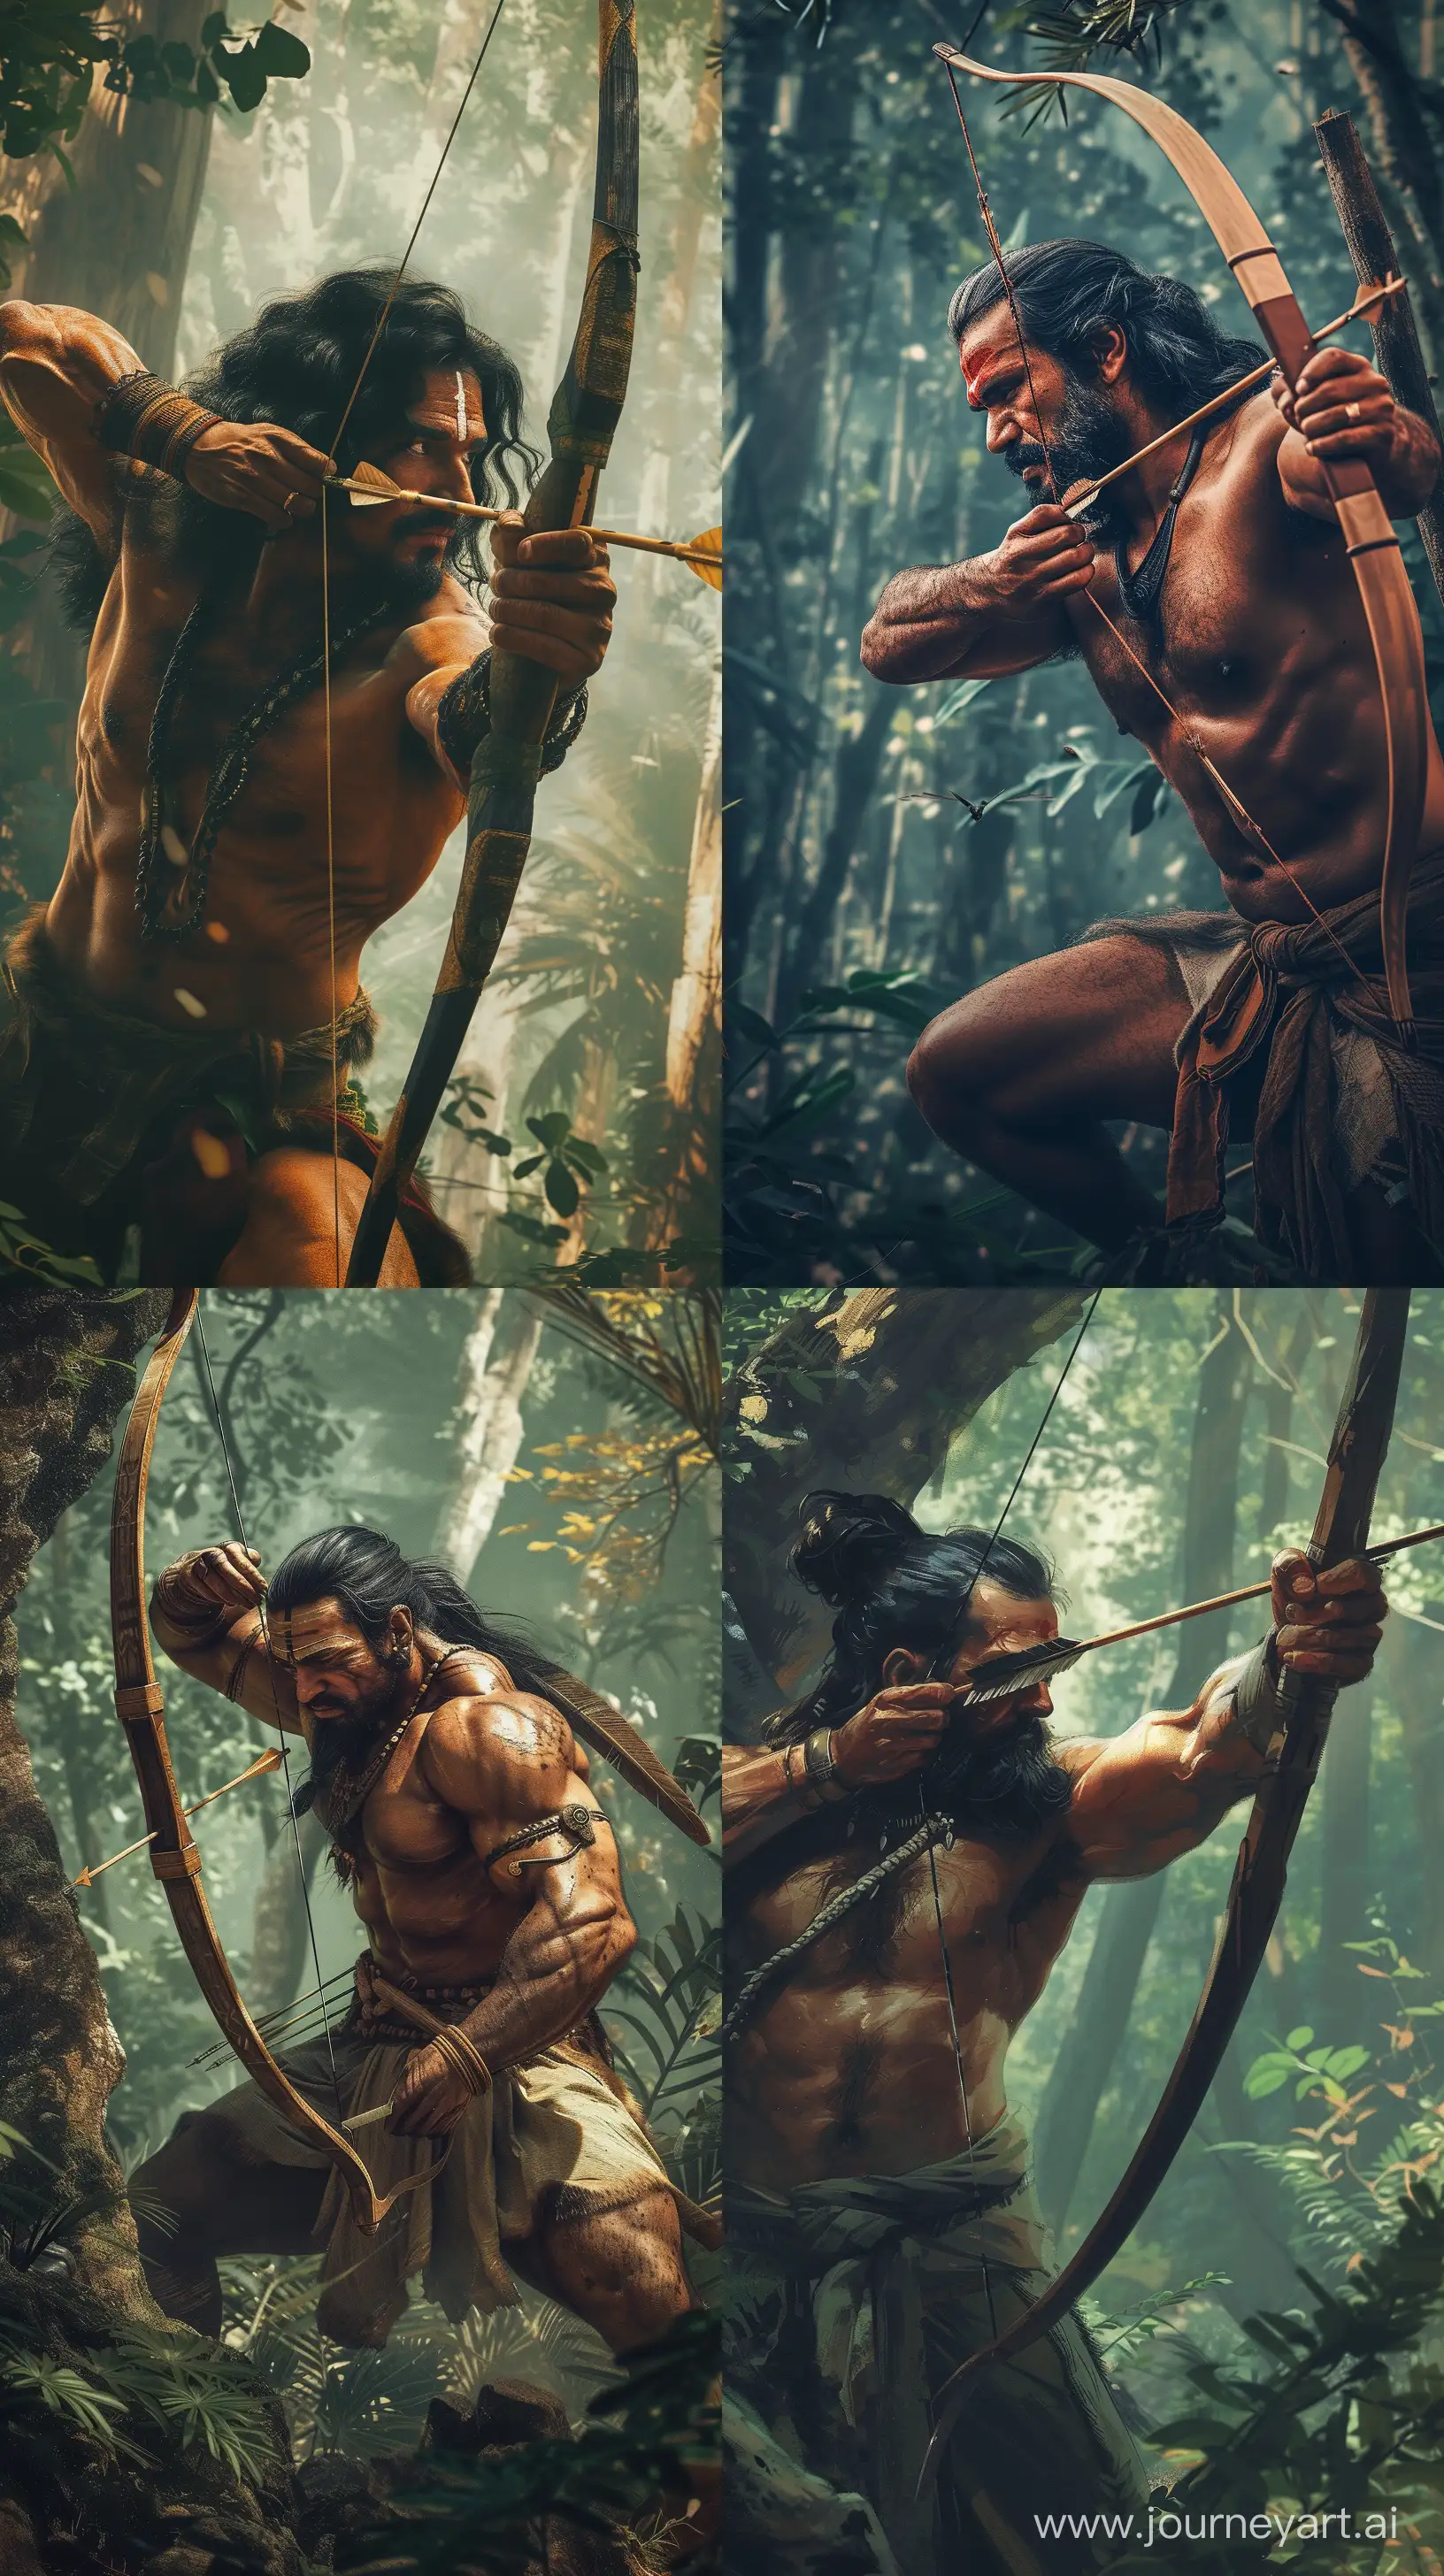 Ancient-Indian-Hunter-with-Bow-and-Arrow-in-Lush-Forest